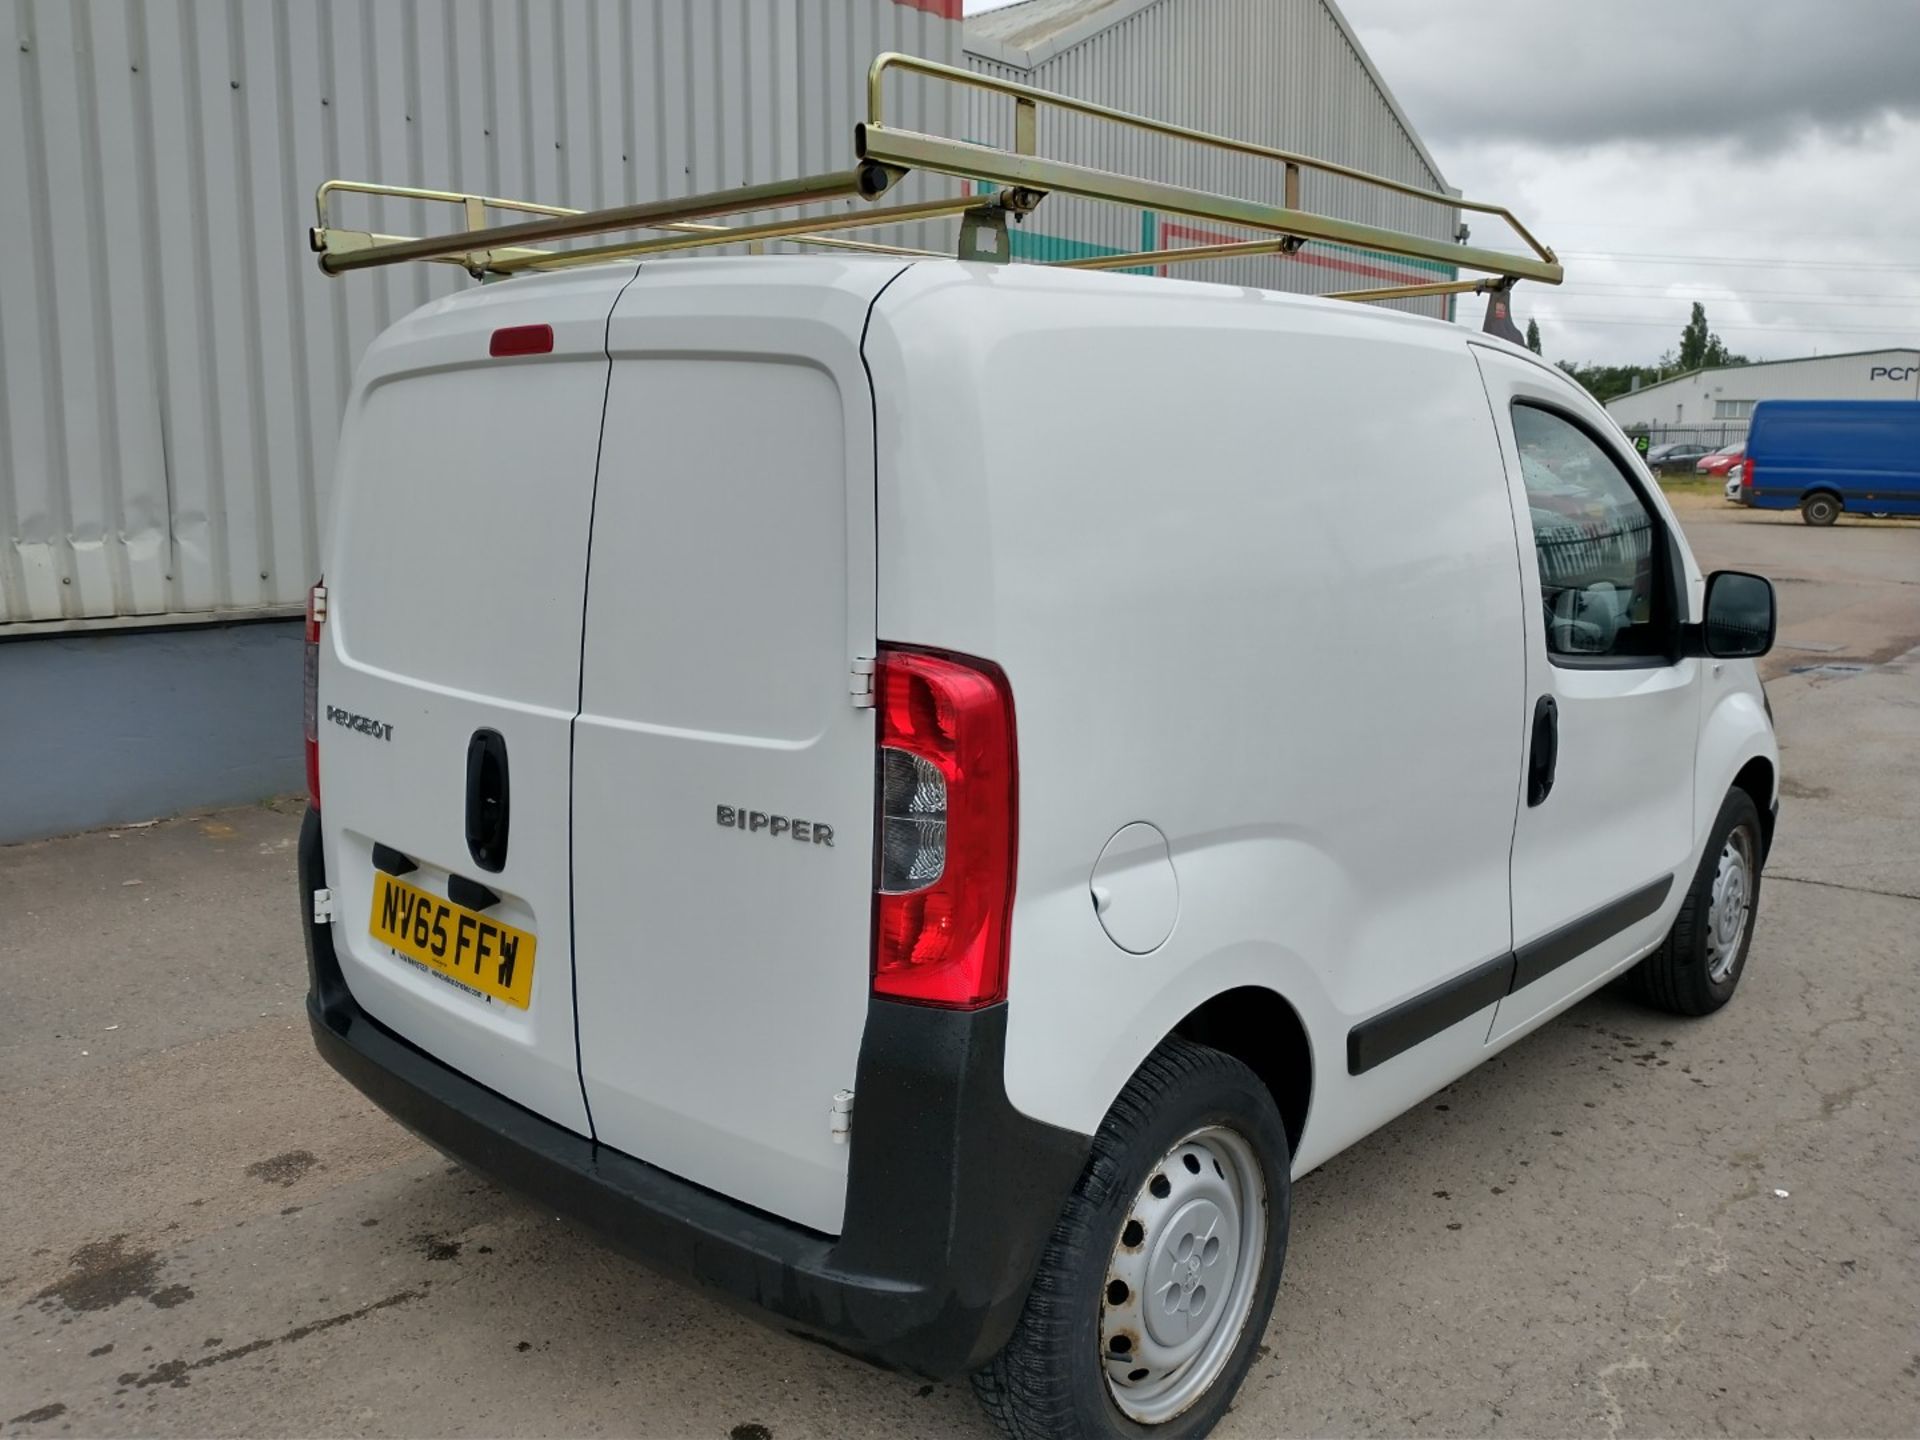 2015 Peugeot Bipper S Hdi White Panel - CL505 - Ref: VVS031 - Location: Corby, Northamptonshire - Image 17 of 25